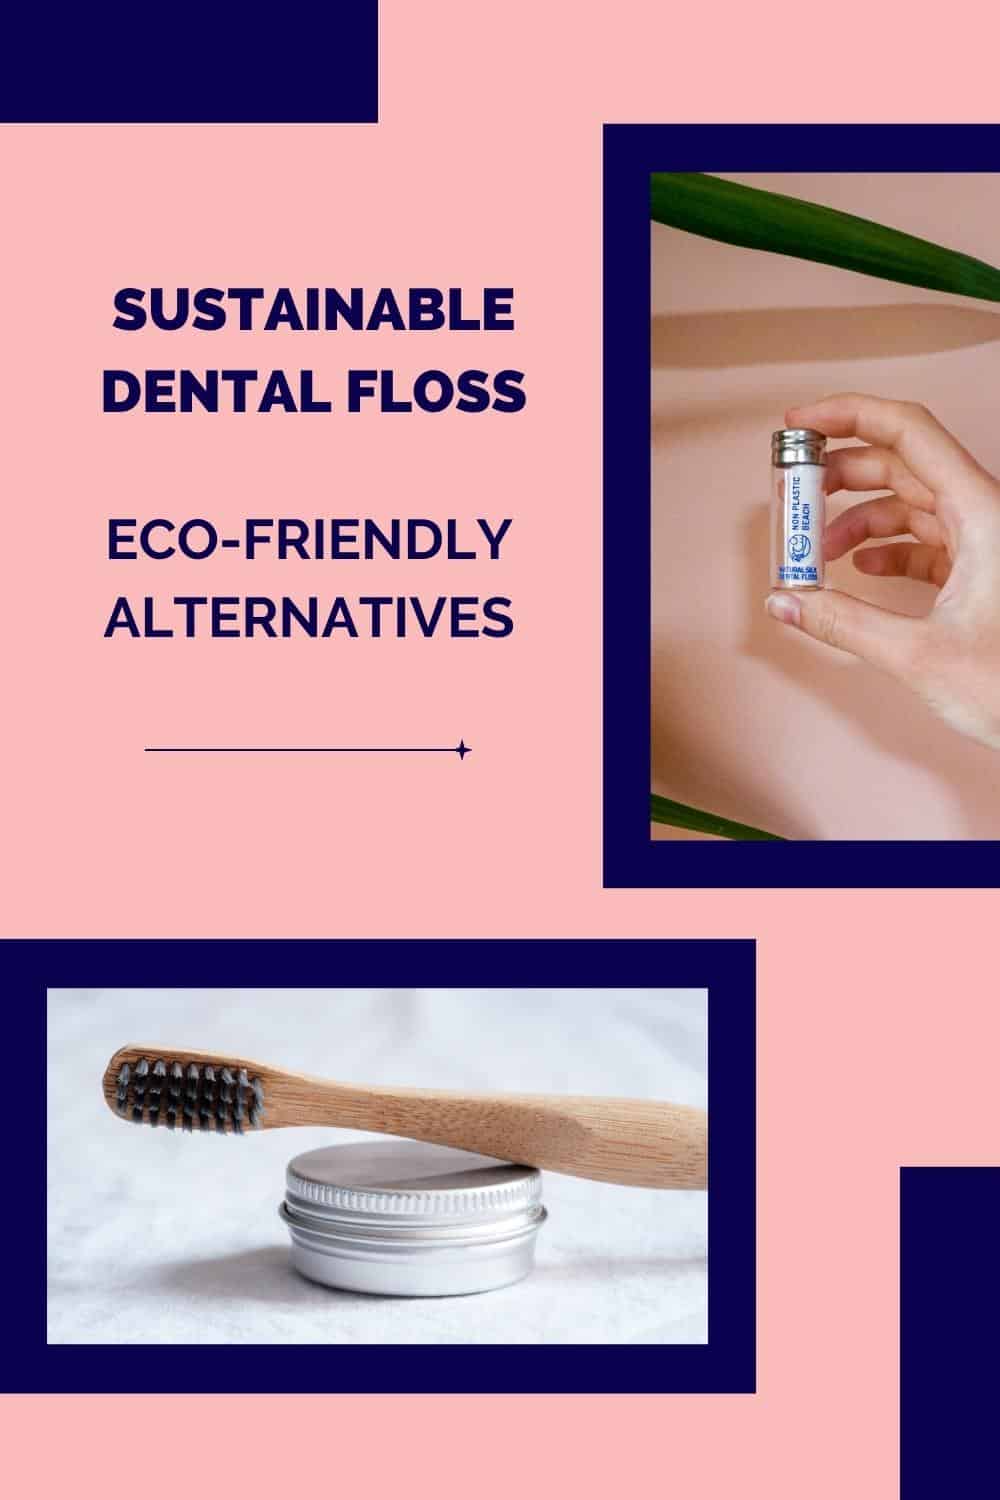 Zero waste glass floss container and plastic-free toothbrush